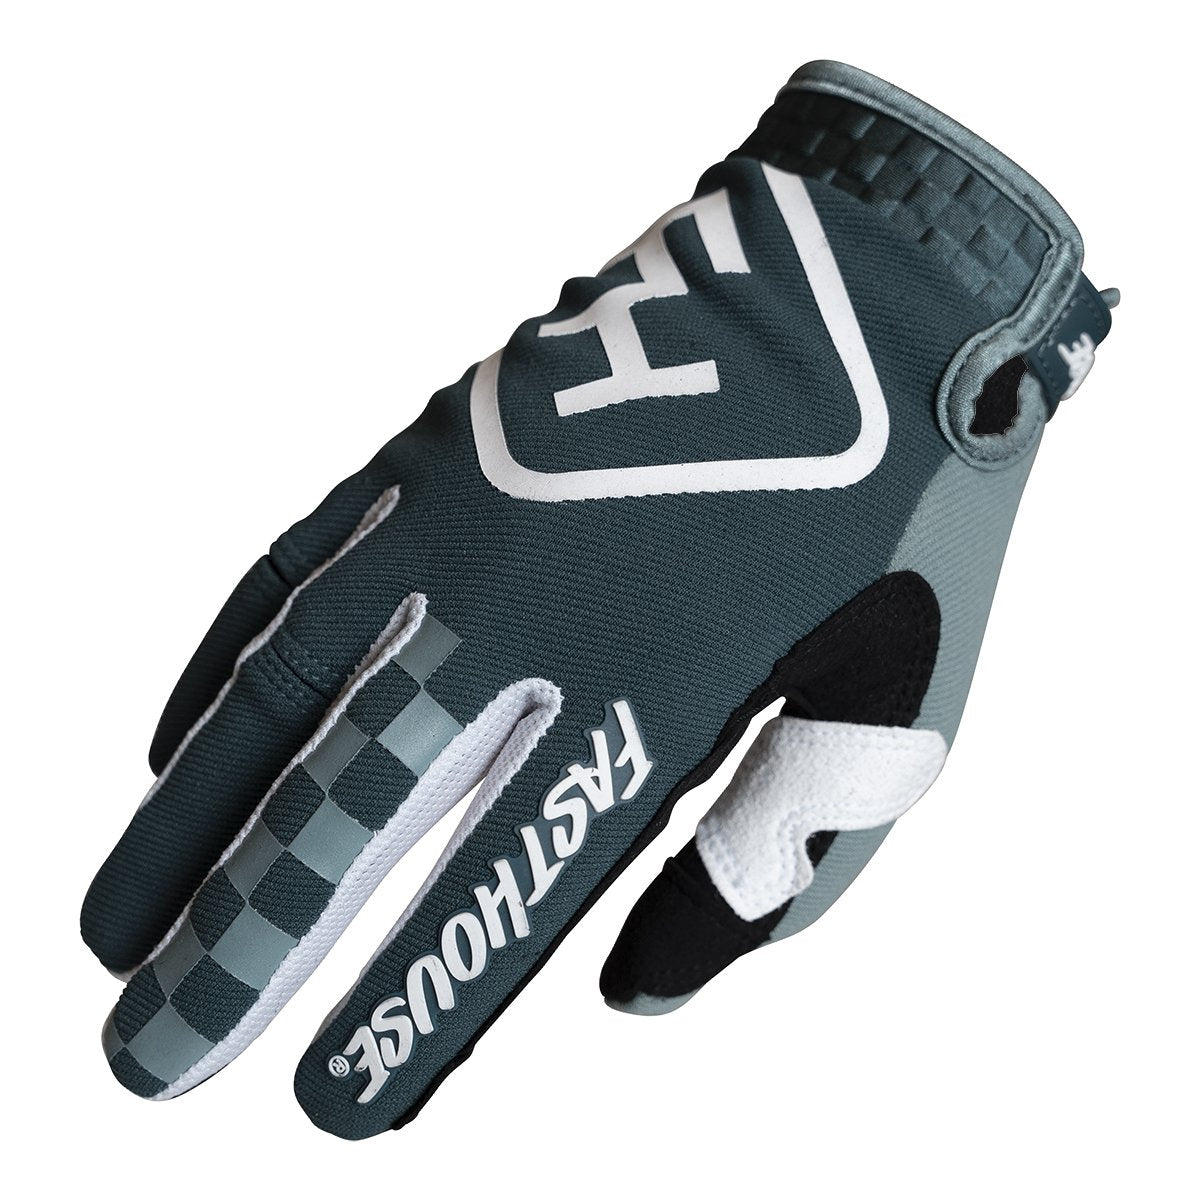 Fasthouse Speed Style Legacy Gloves